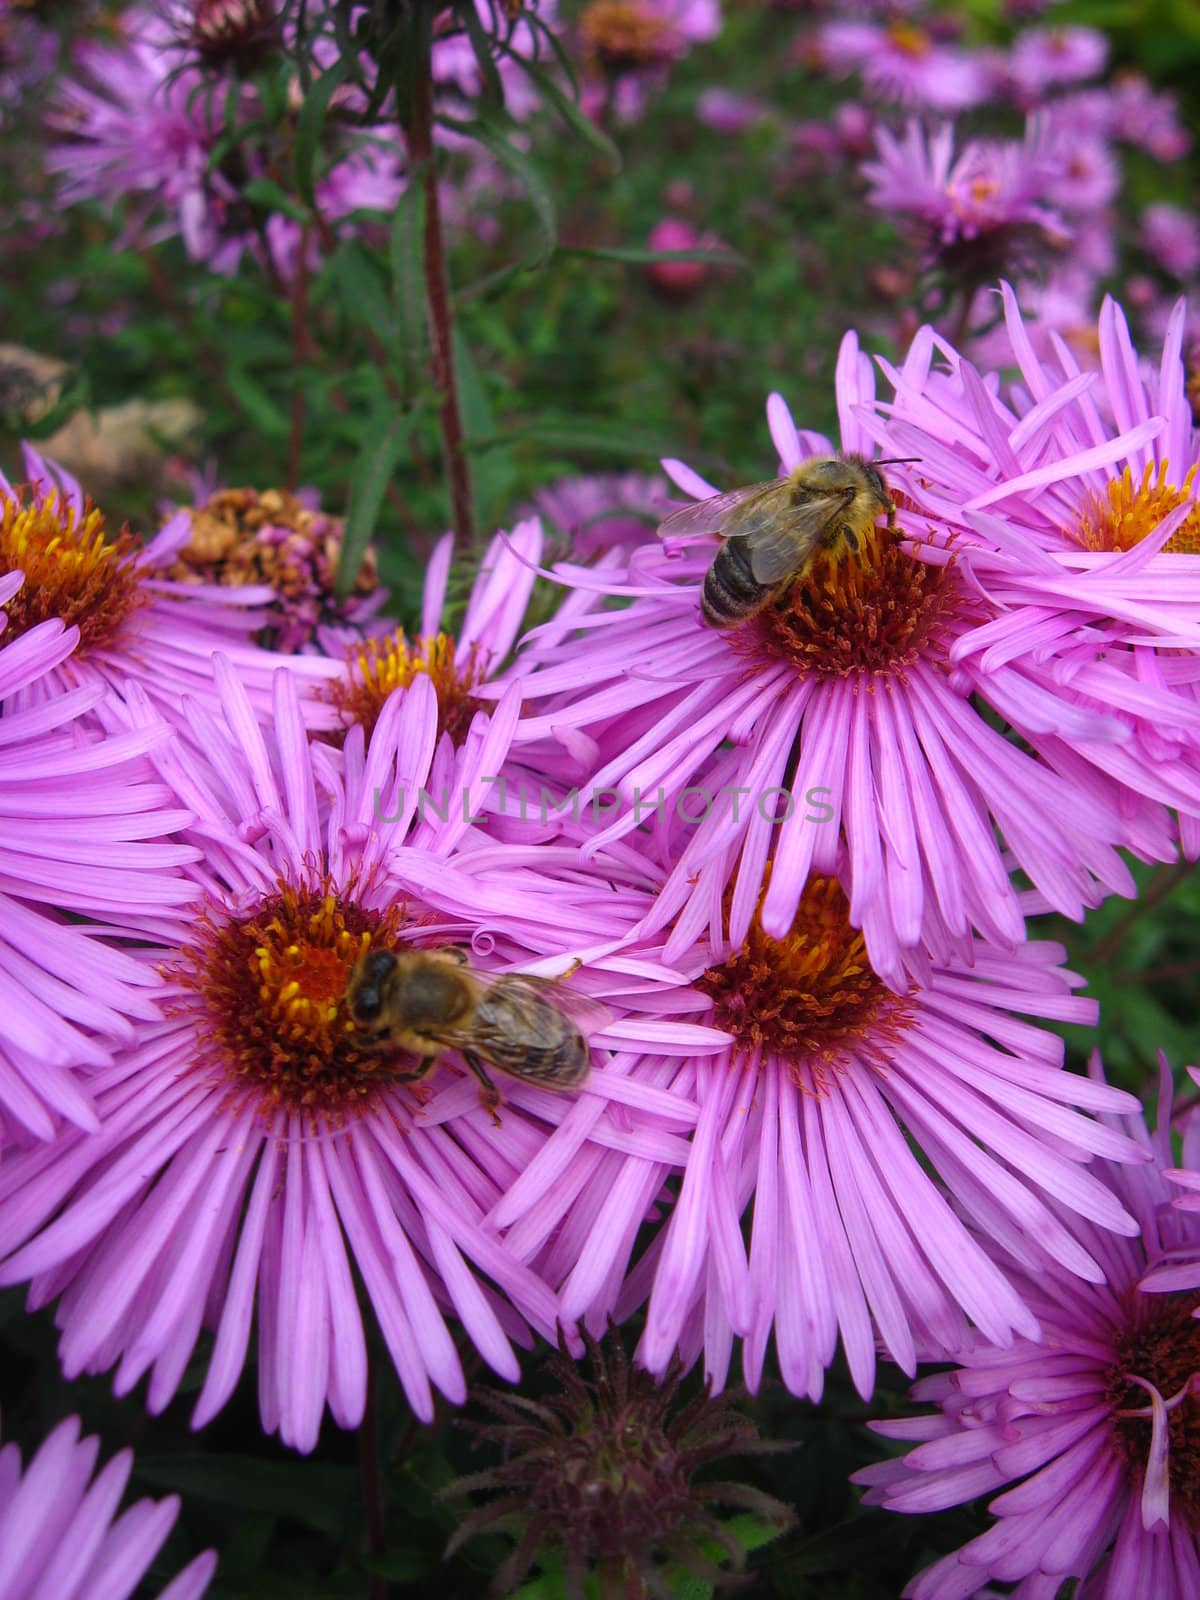 The bees sitting on the asters by alexmak